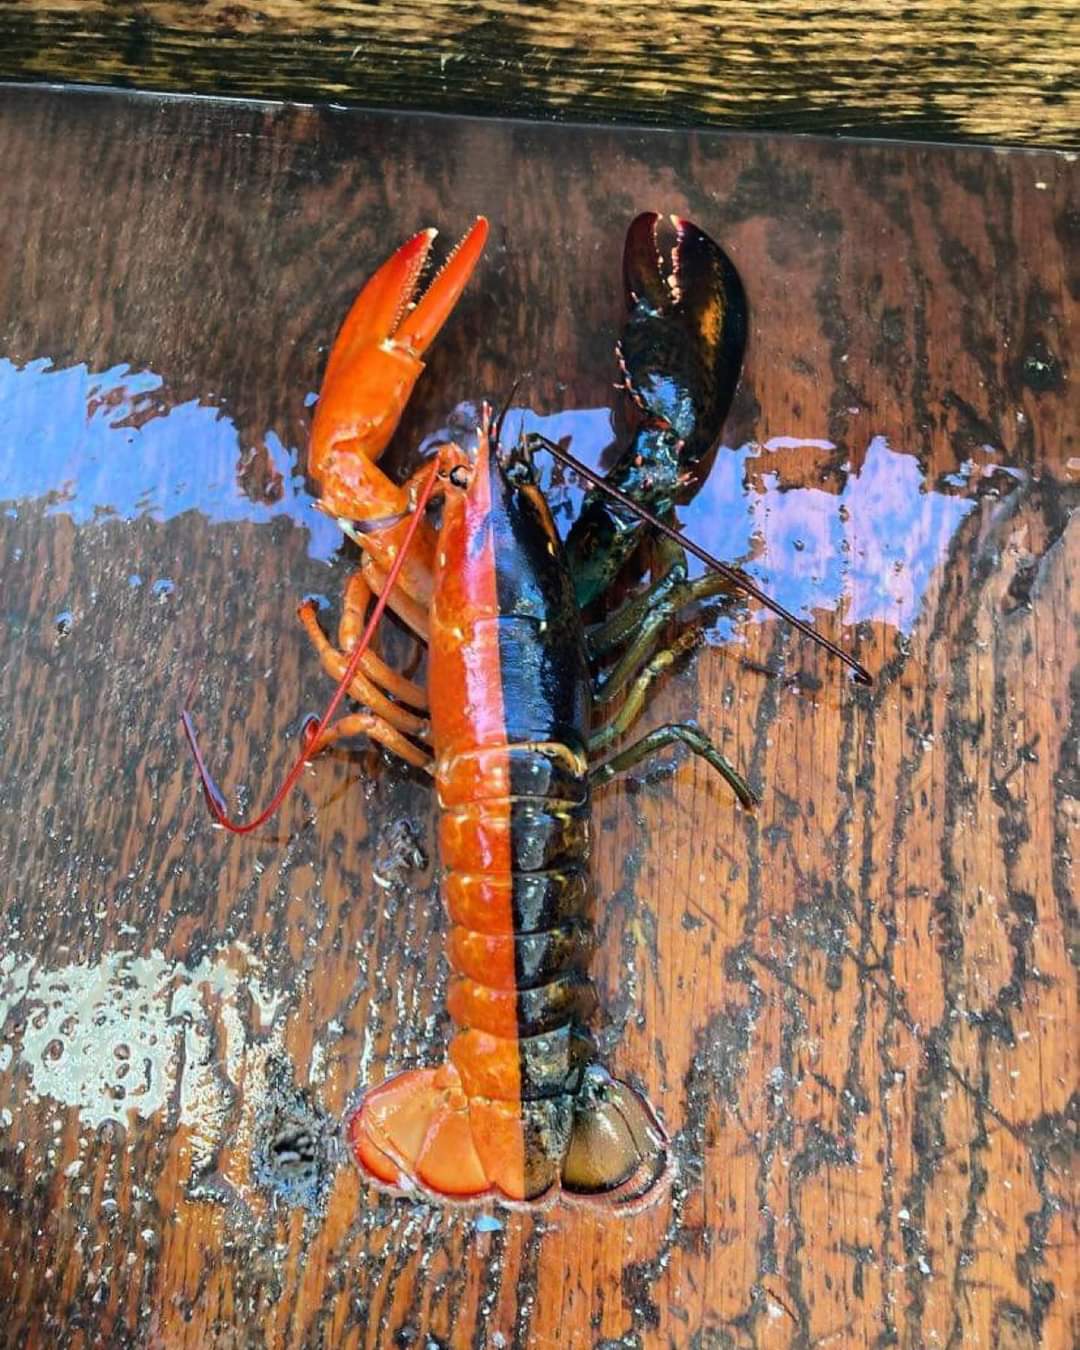 "This Rare Two-Toned Red and Black Maine Lobster: A Fascinating '1 in 50 Million' Discovery!" SN - LifeAnimal